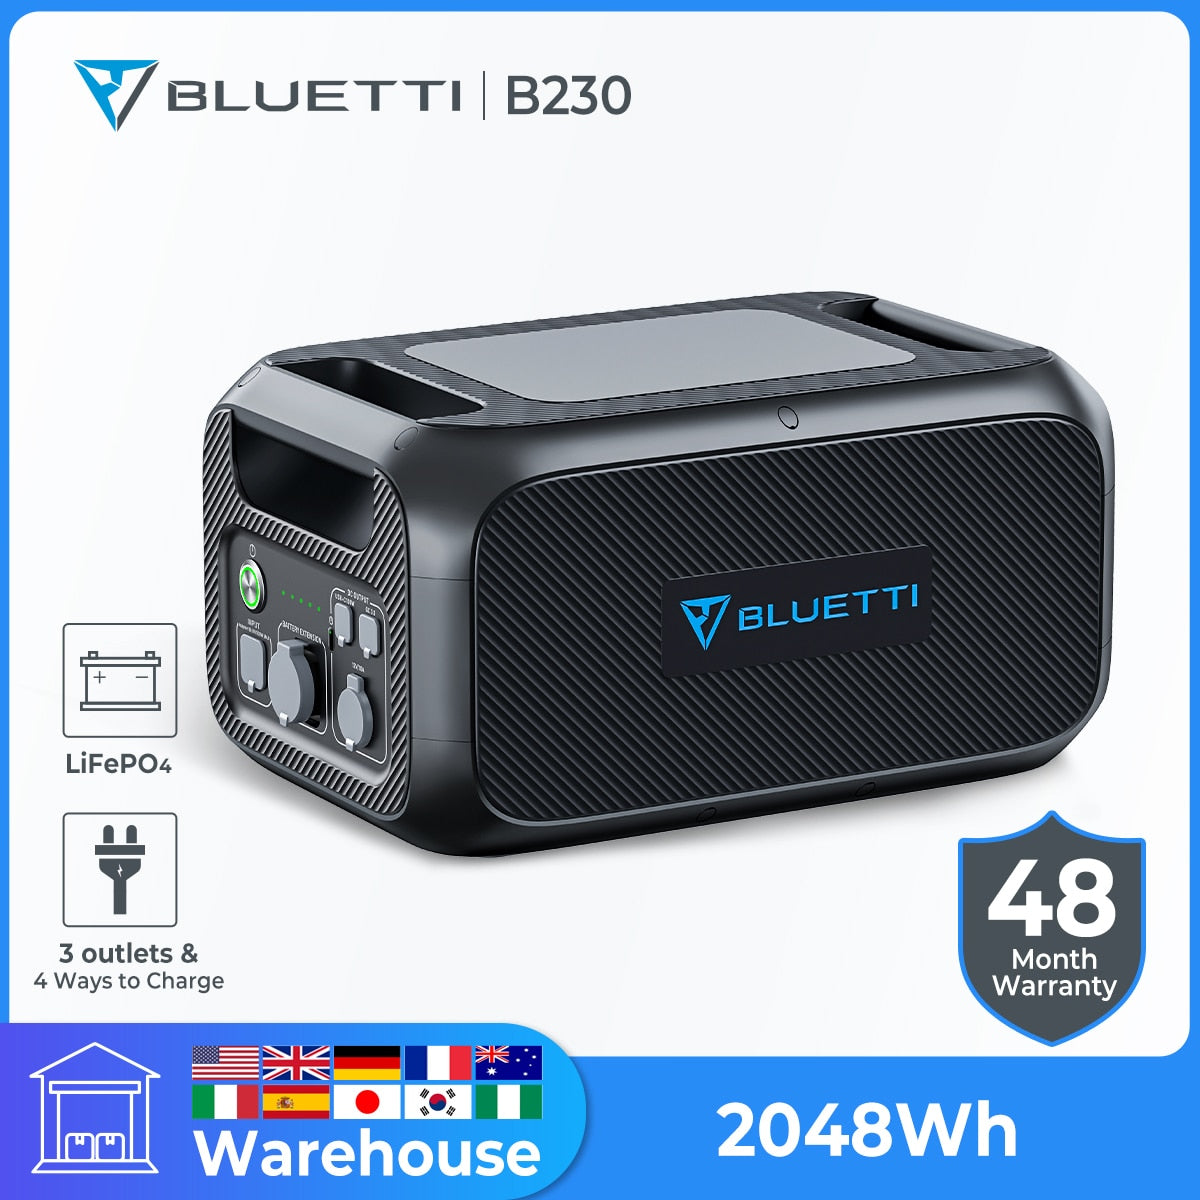 BLUETTI B230 Expansion Battery 2048Wh LiFePO4 Battery Pack for Power Station AC200MAX/AC200P/EP500Pro/EB150/EB240 Extra Battery